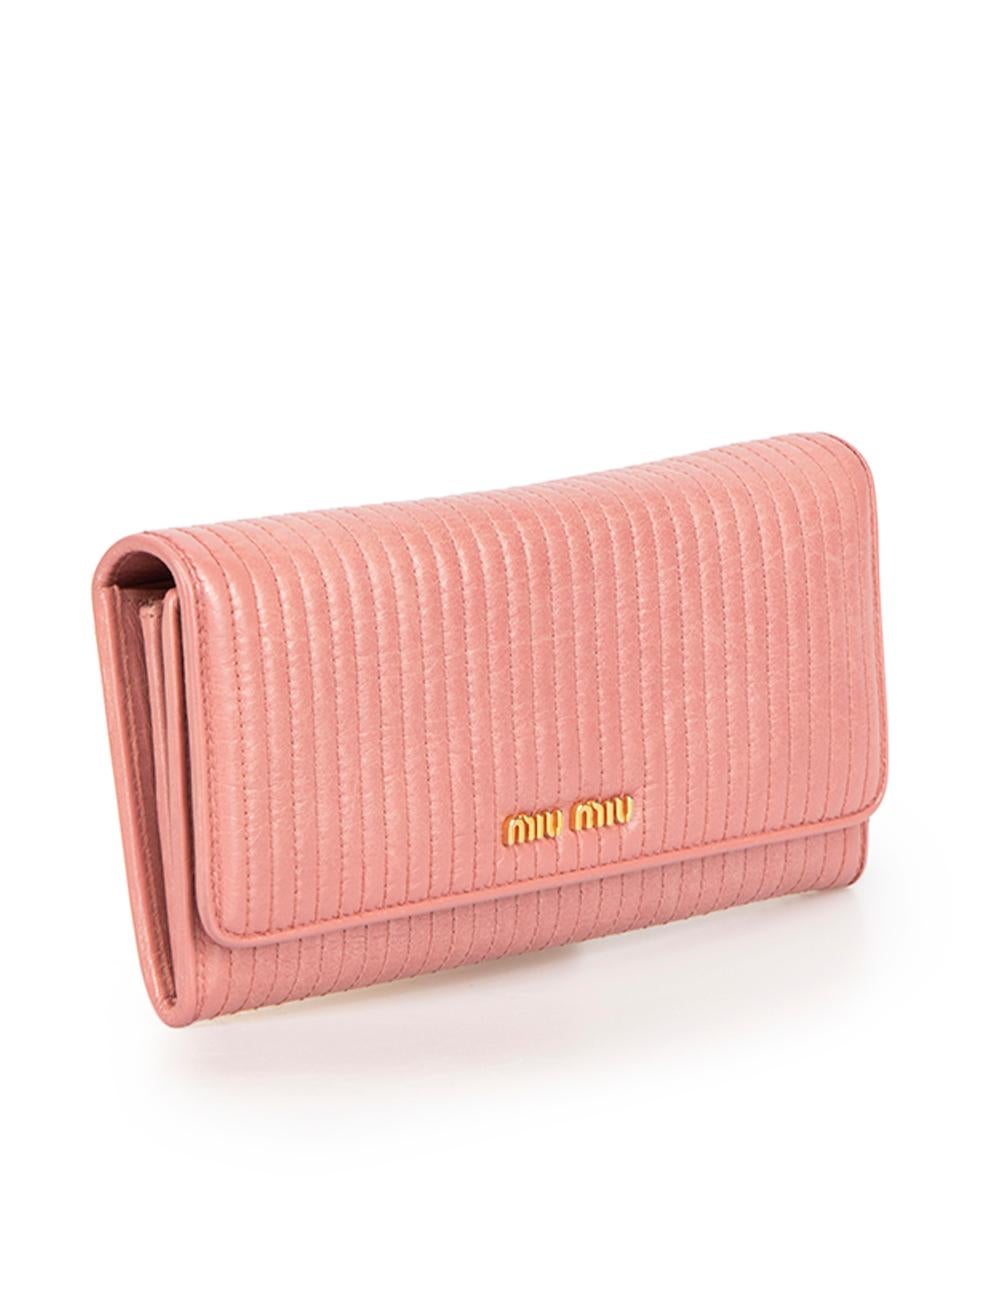 CONDITION is Very good. Minimal wear to wallet is evident. Minimal wear to the exterior with darkening and general creasing to the leather on this used Miu Miu designer resale item. This wallet comes with original box.
 
 Details
 Pink
 Leather
